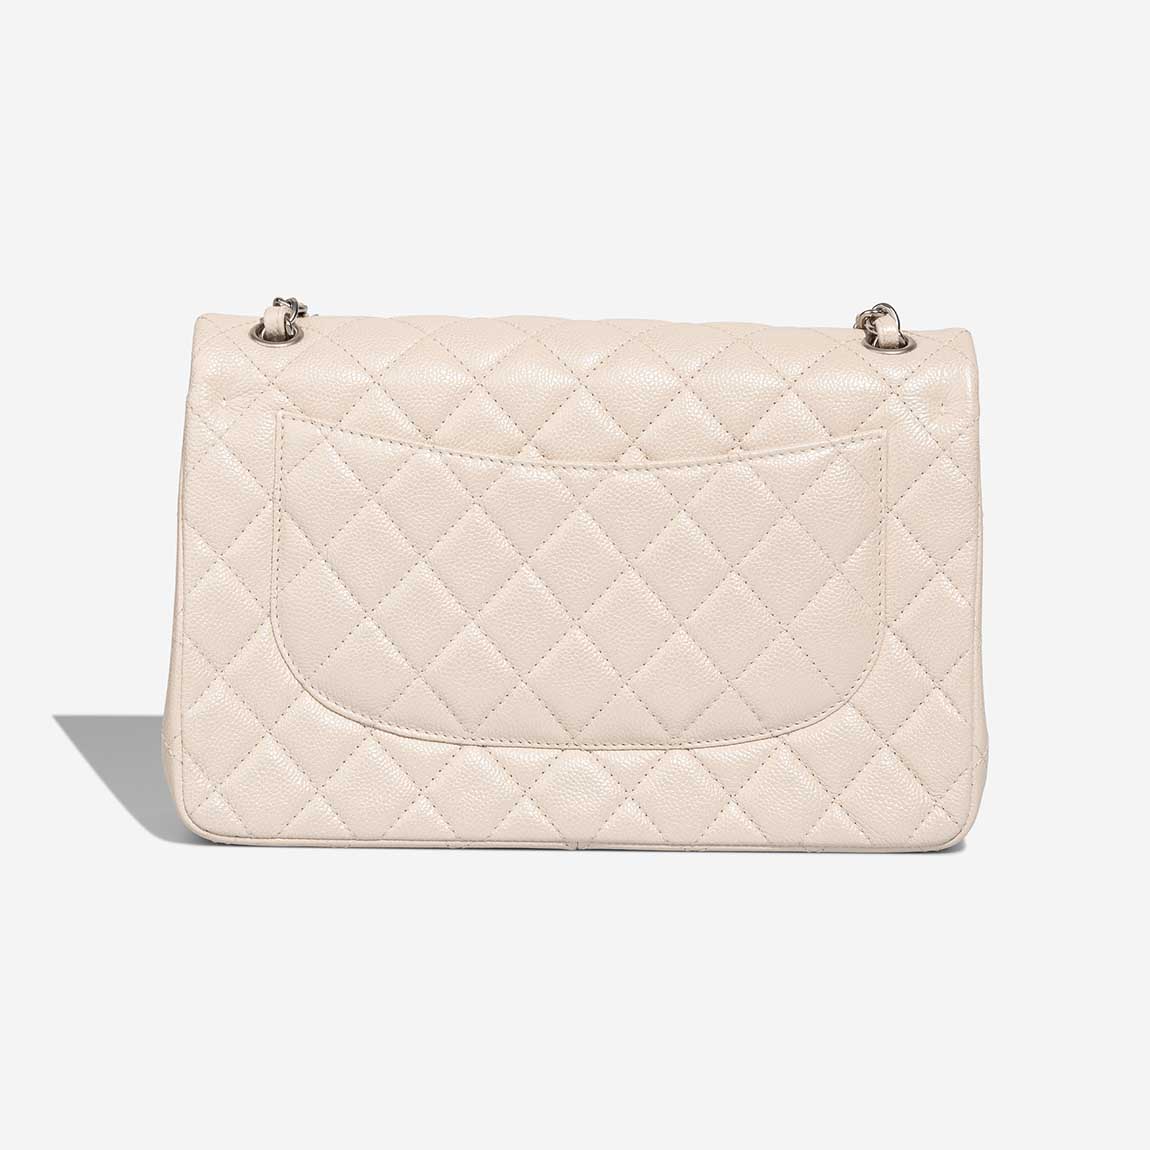 Chanel Timeless Maxi Caviar Pearl White | Sell your designer bag